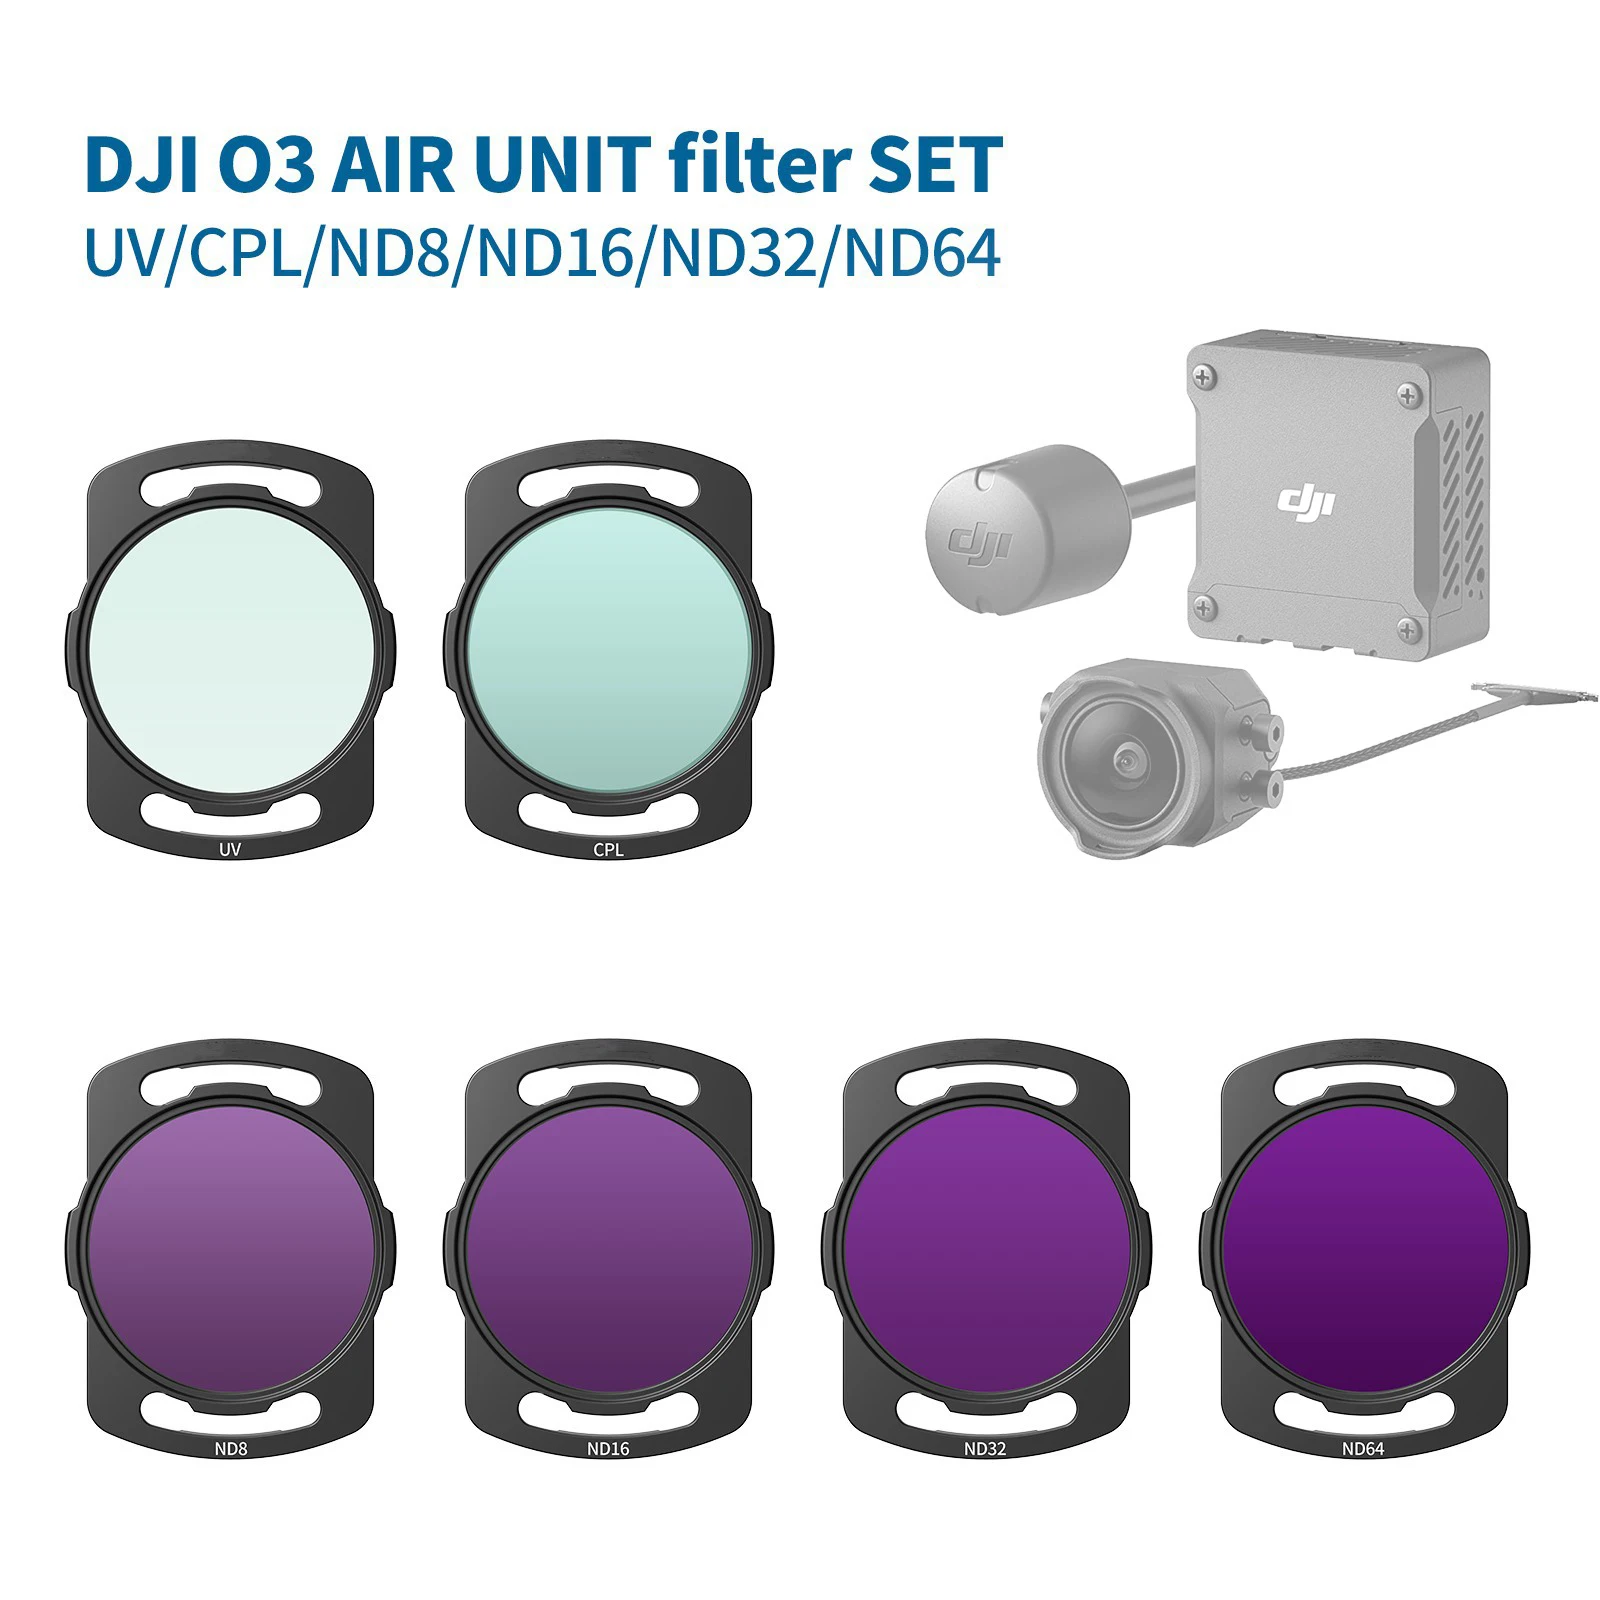 nd-filter-set-compatible-with-dji-o3-air-unit-avata-drone-6-pack-nd8-nd16-nd32-nd64uvcpl-use-on-fpv-drone-with-o3-air